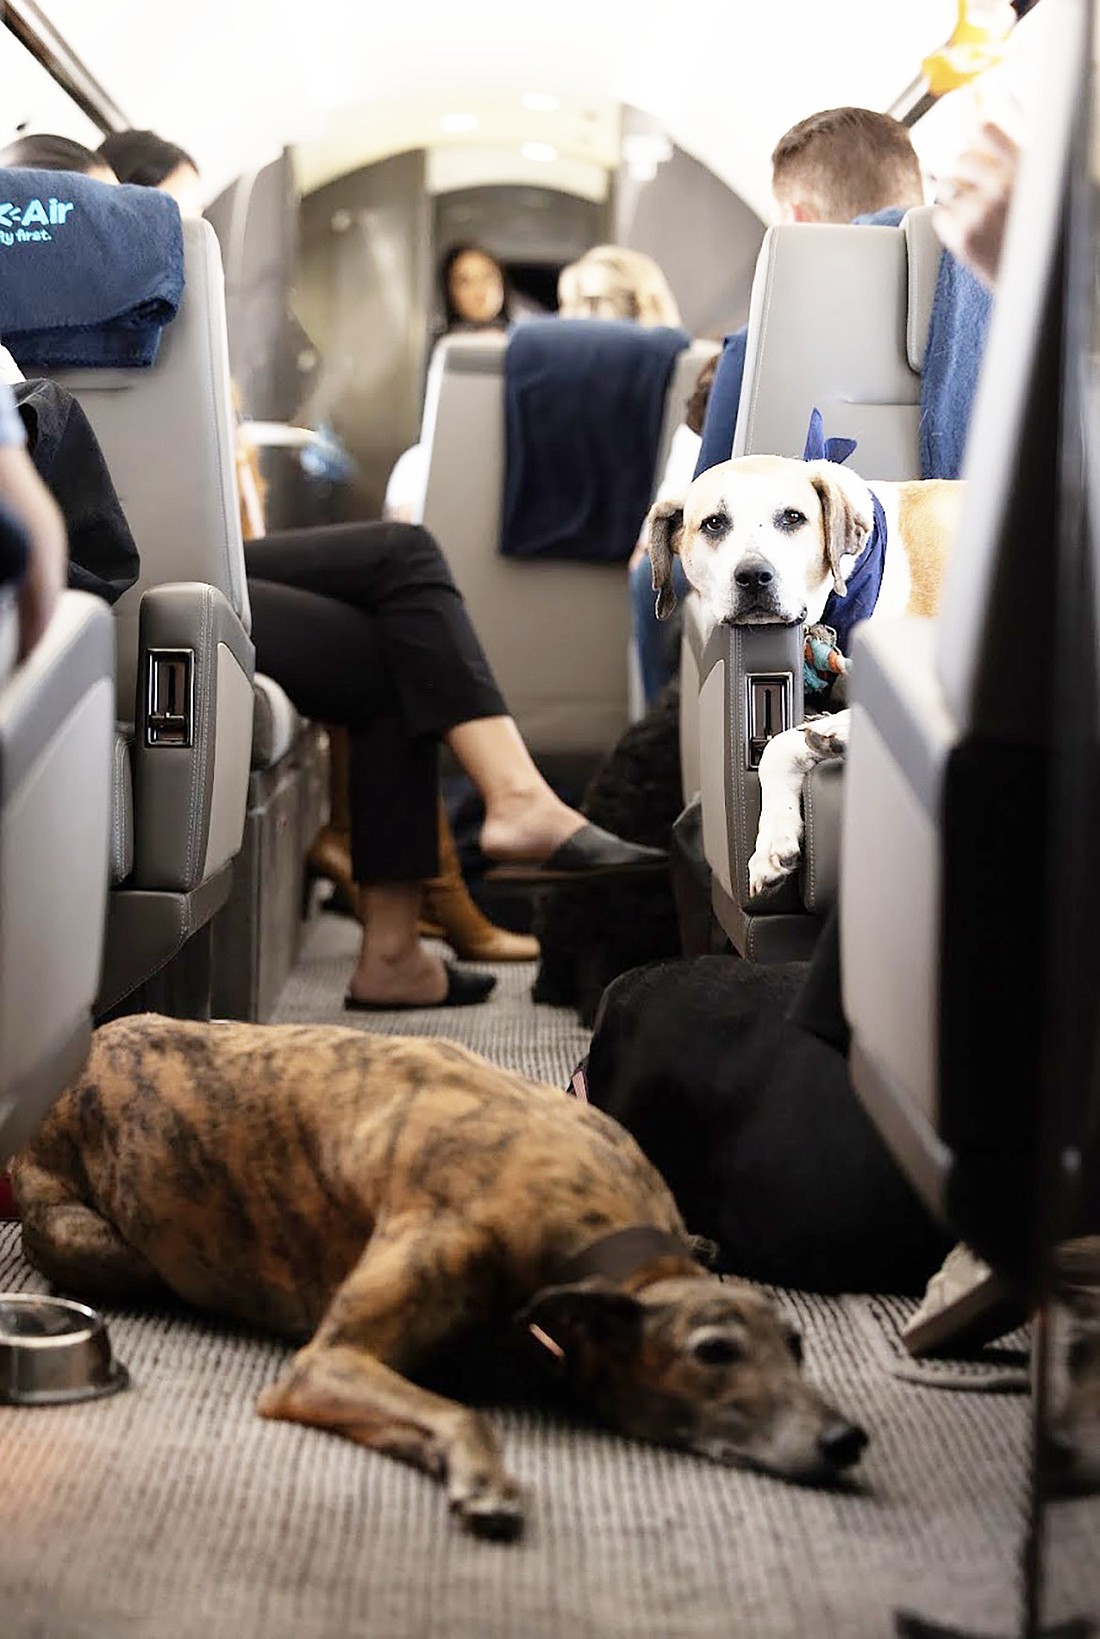 BARK Air wants dogs and their owners to know that they will be treated with special care. But will they be flying out of Westchester County Airport as Bark Air announced?